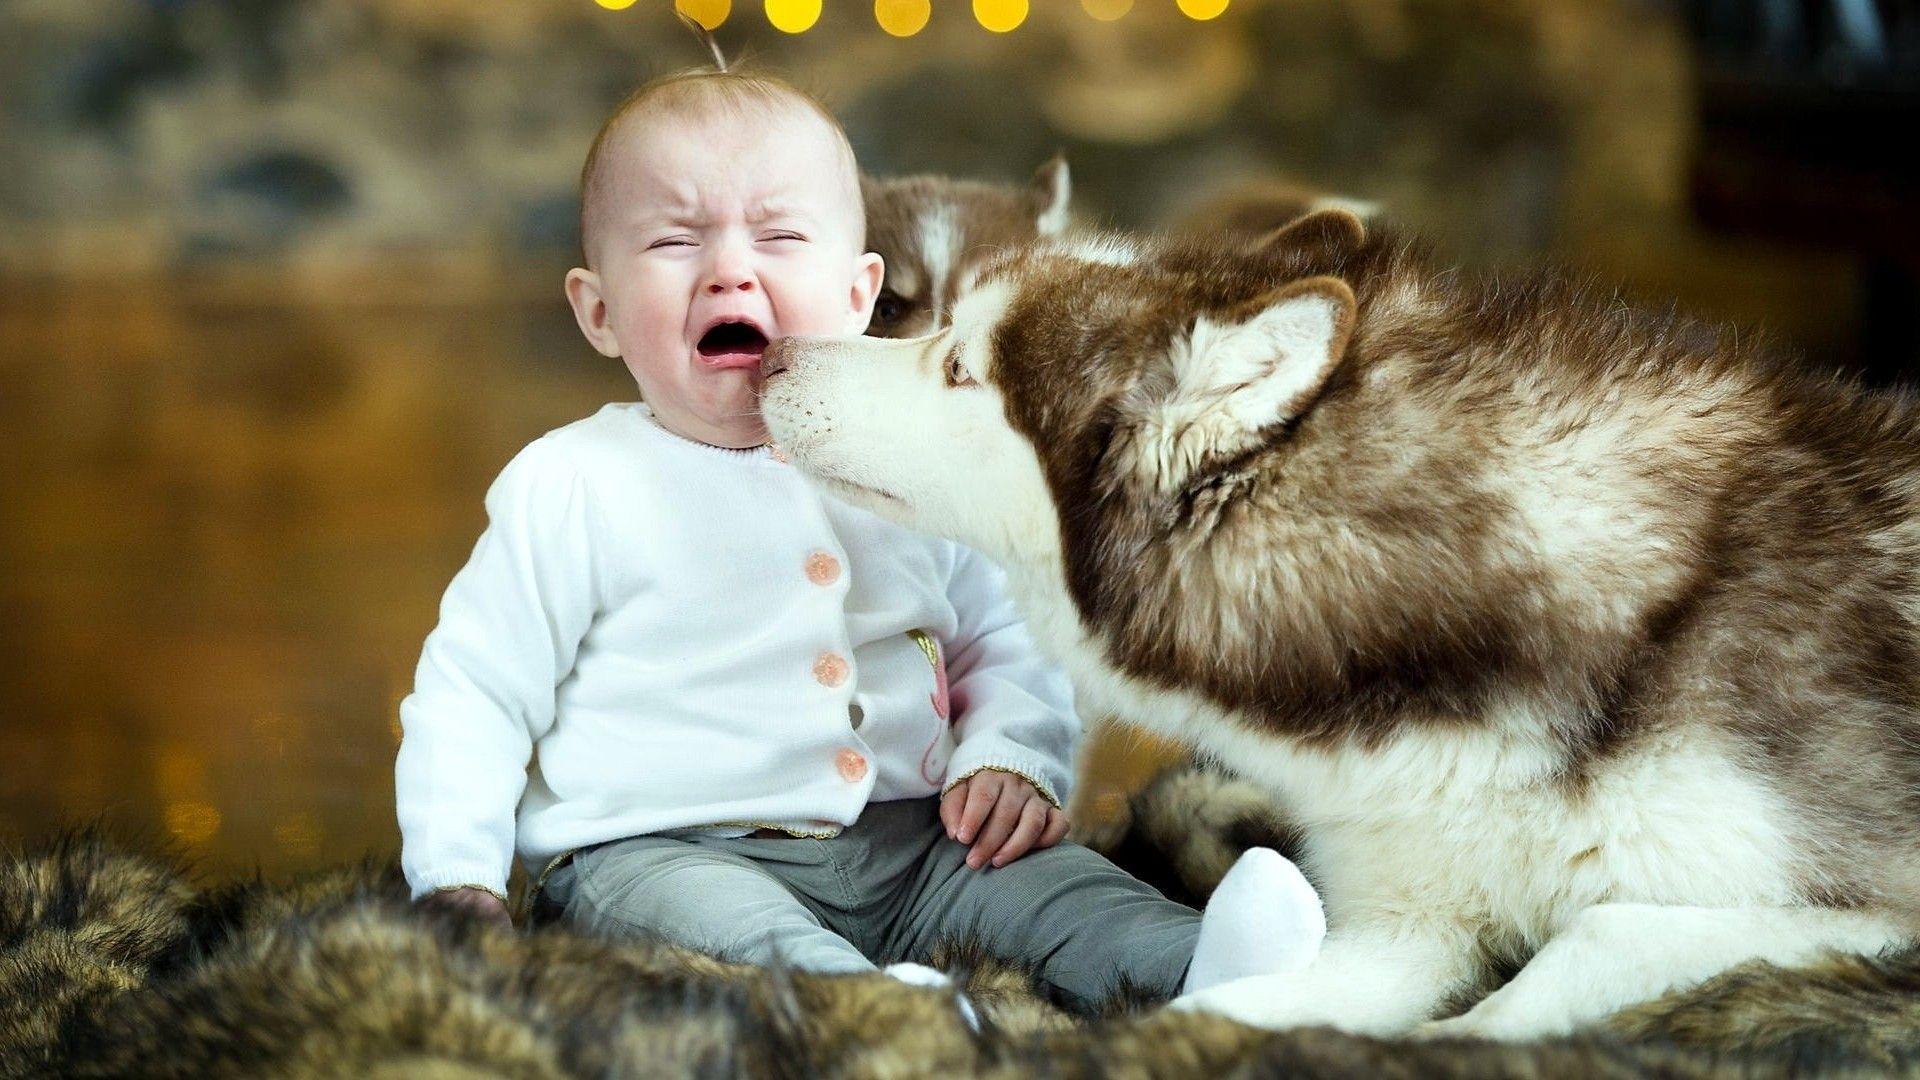 Cute Crying Baby With Dog Wallpaper. Baby puppies, Cute dog